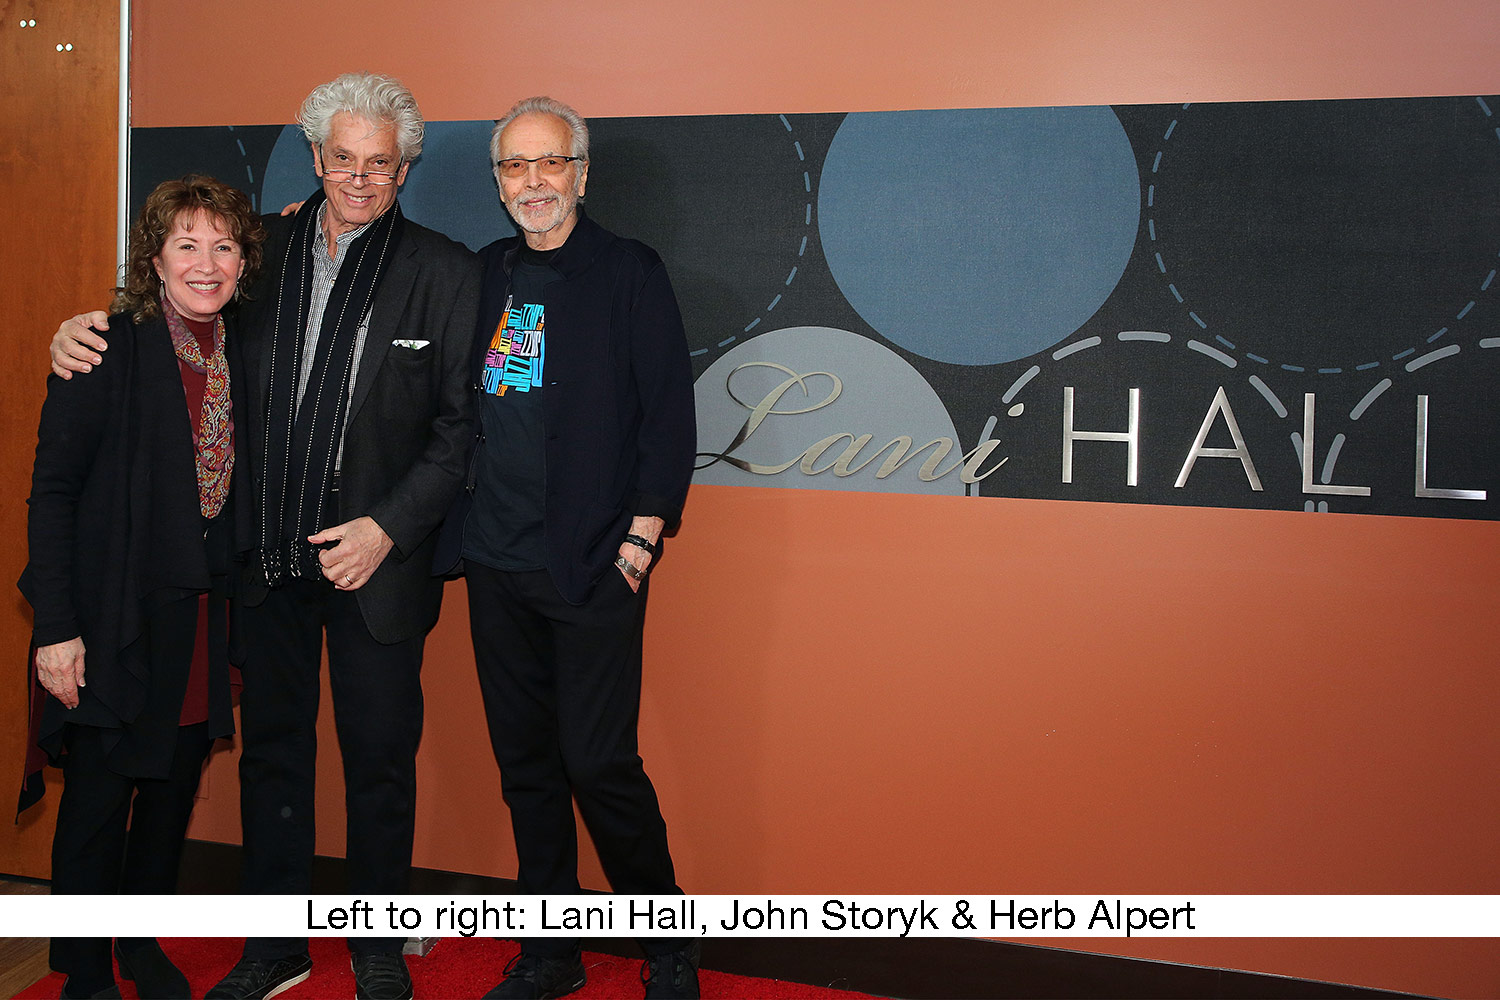 The Herb Alpert Foundation engaged WSDG to design the acoustics for a small on-campus live performance theater at the prestigious UCLA, with help of Lani Hall. Lani Hall, John Storyk and Herb Alpert.